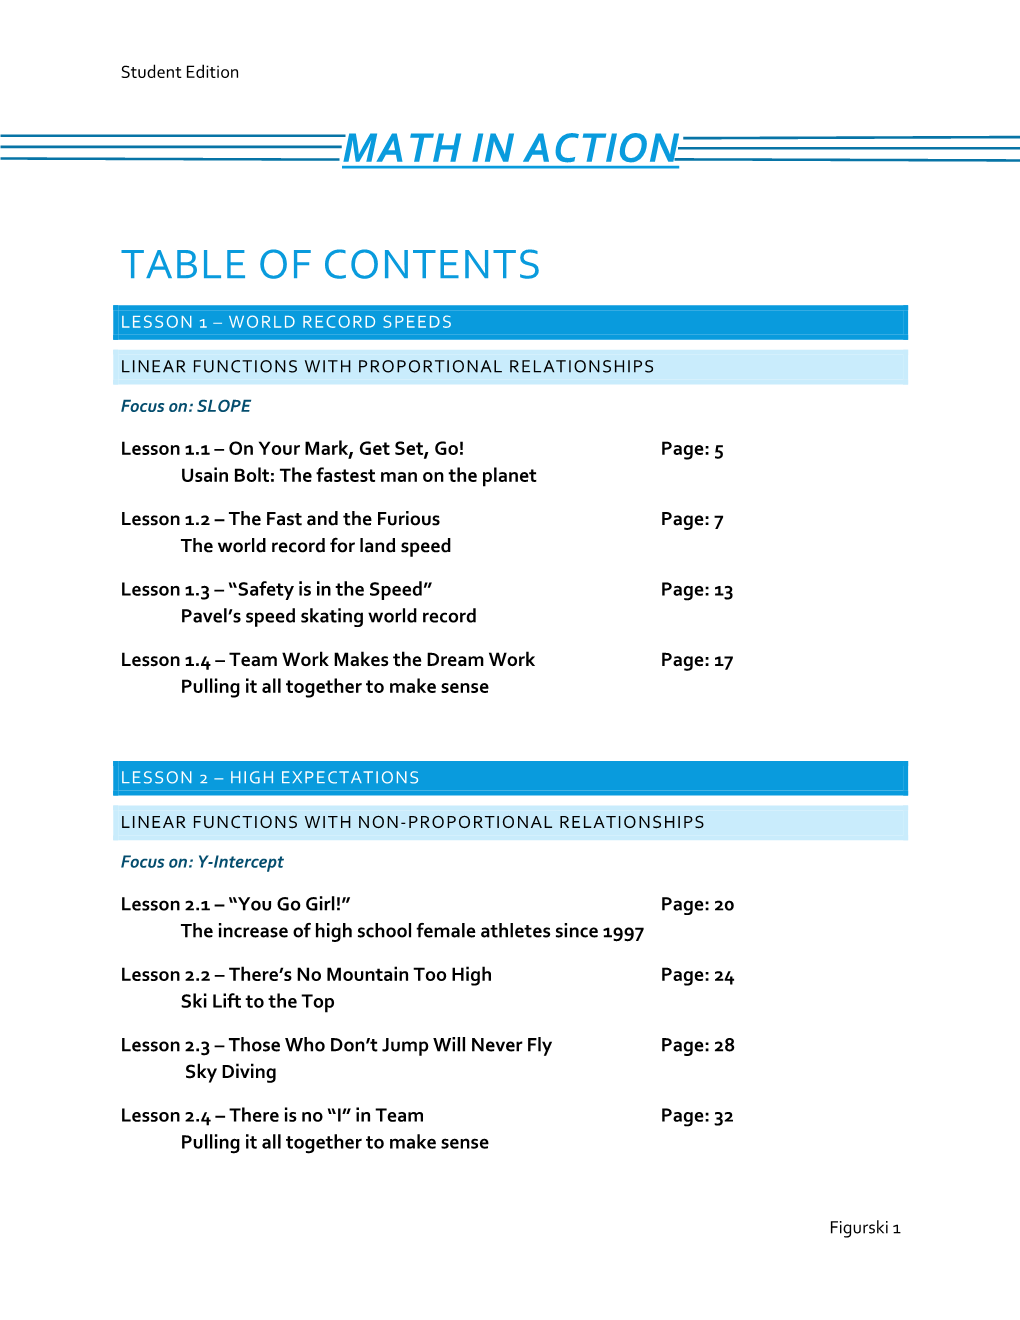 Math in Action Table of Contents